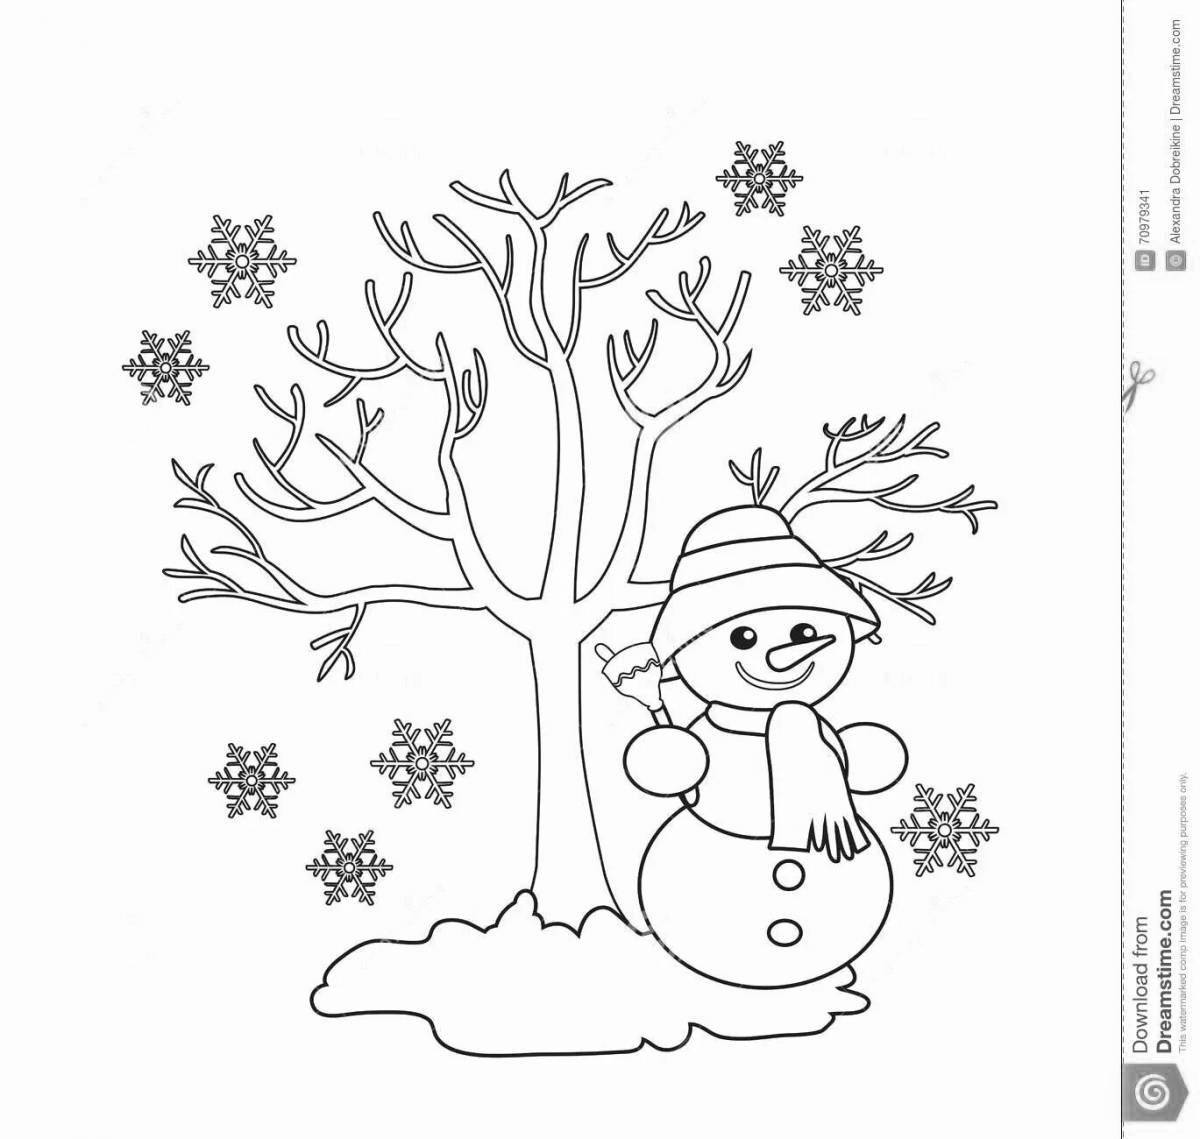 Delightful coloring pages winter plants